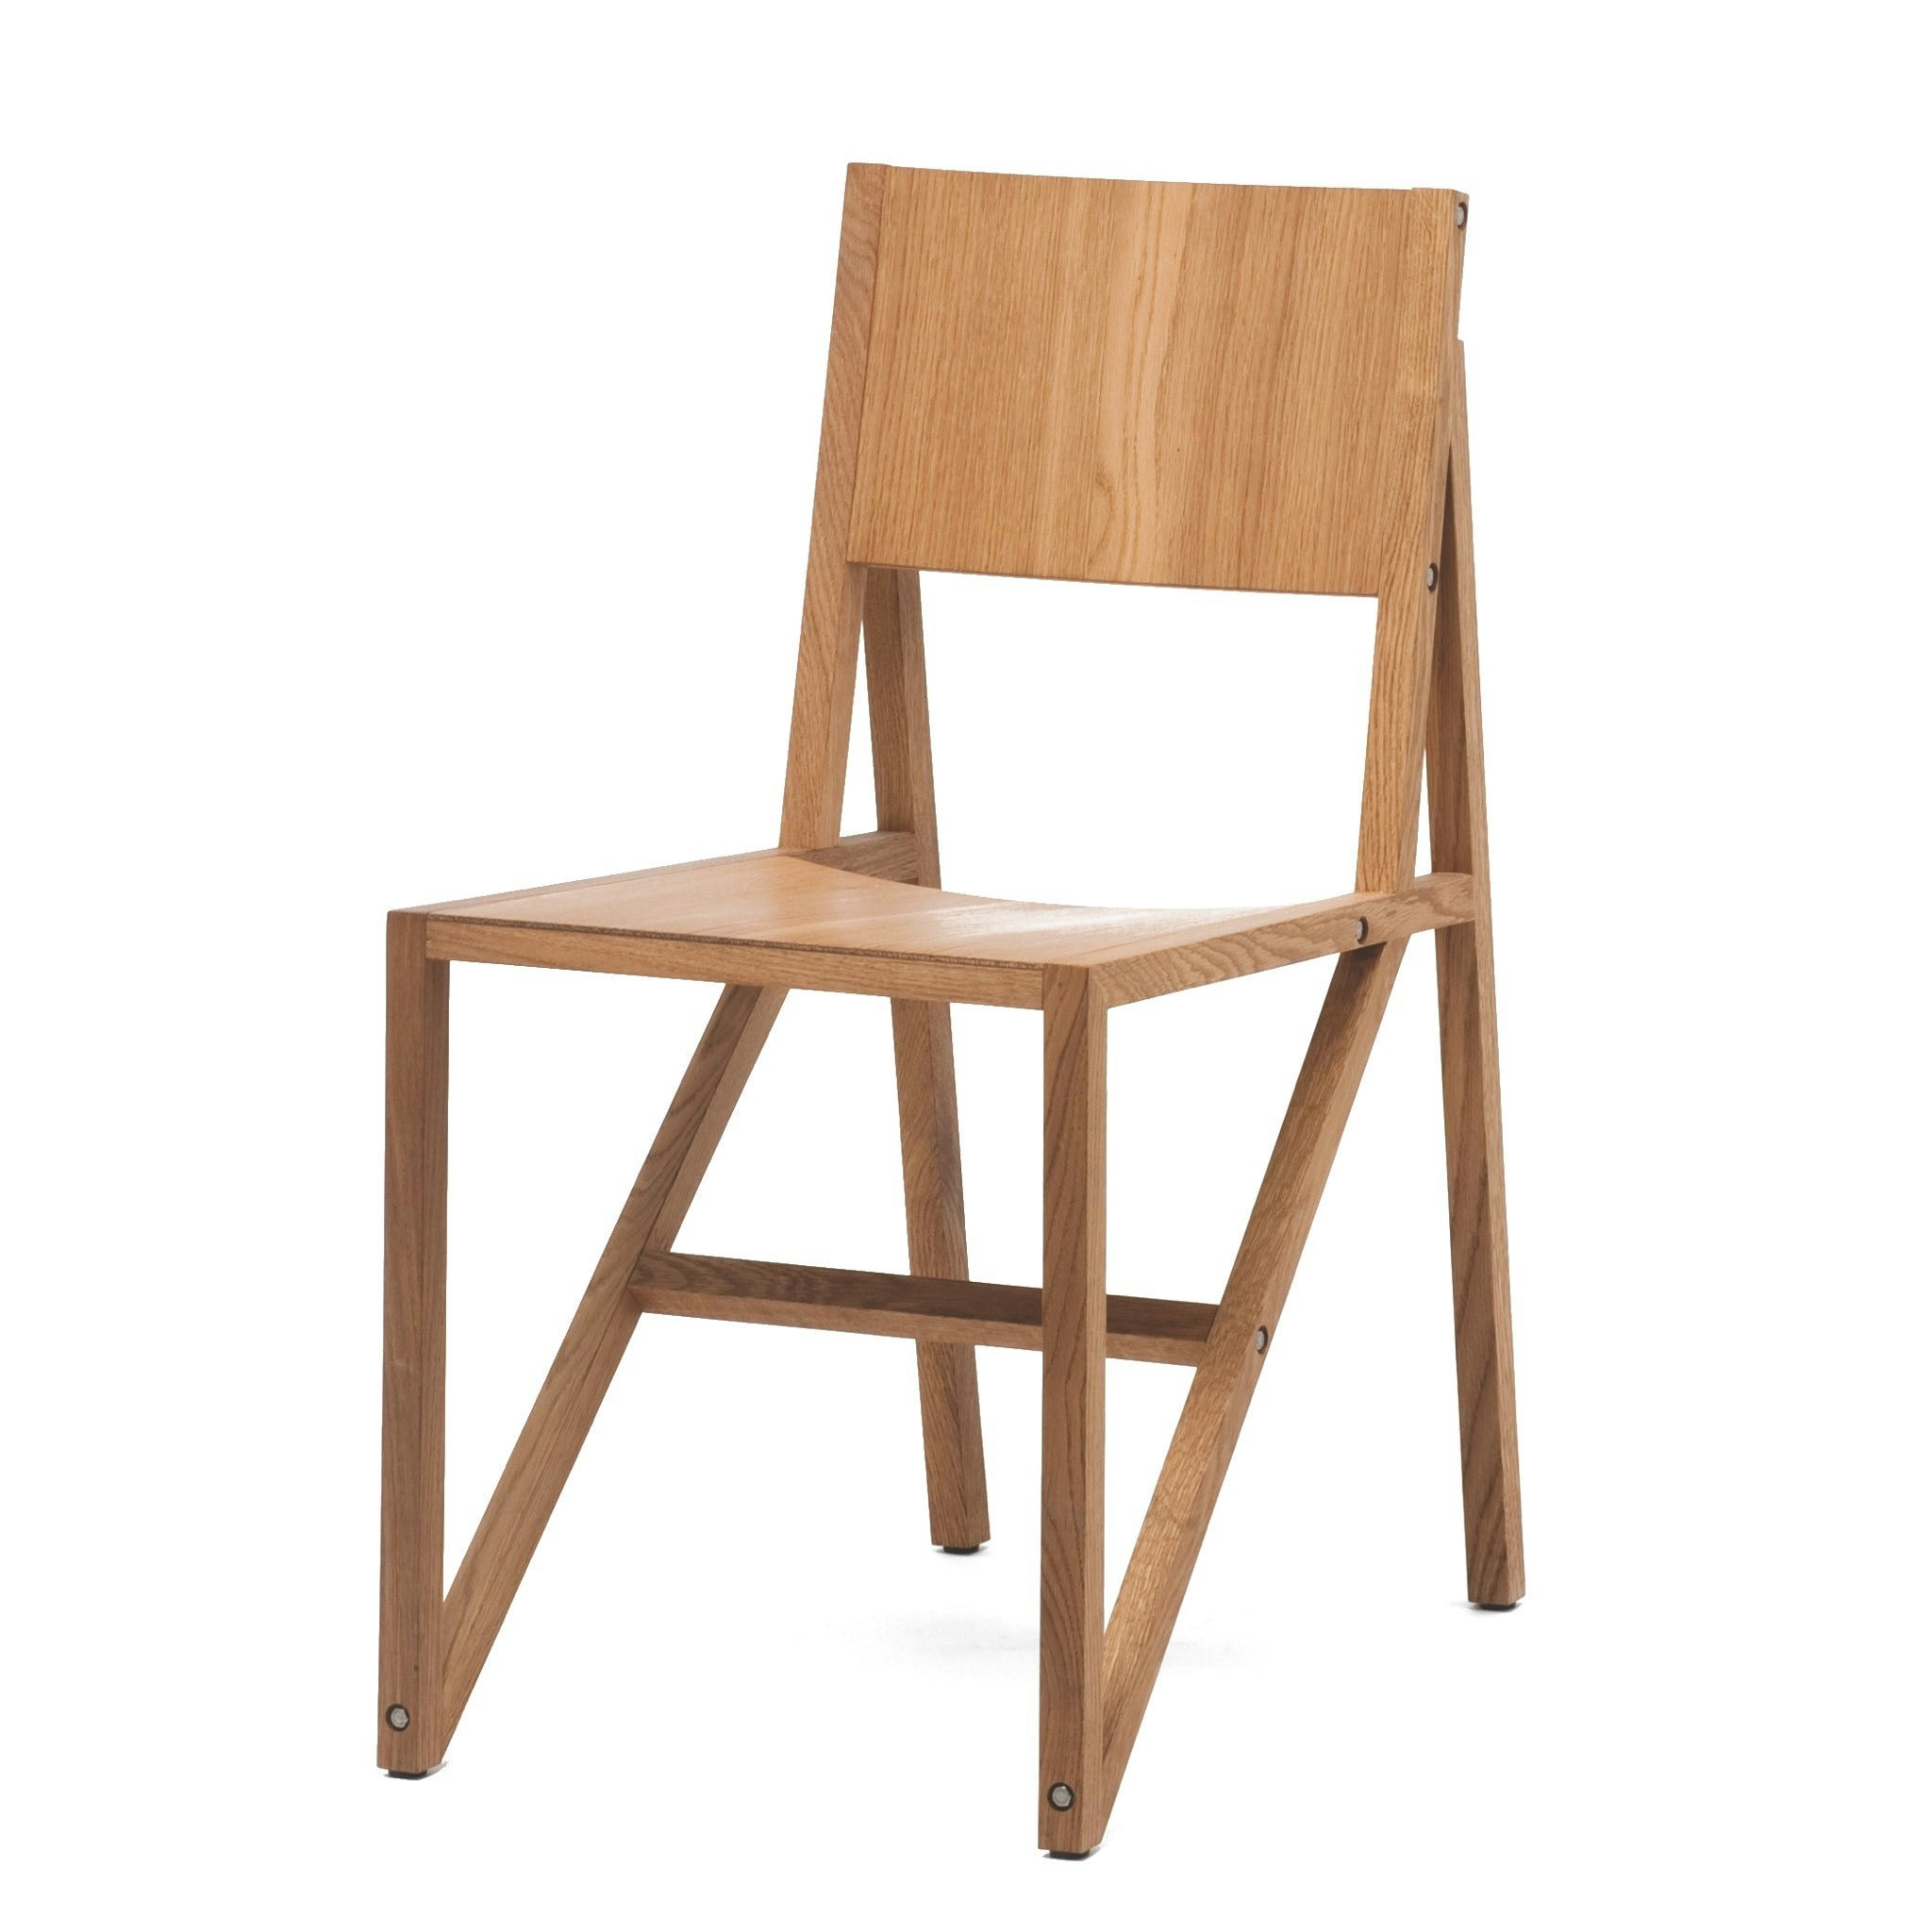 Frame chair by Established & Sons